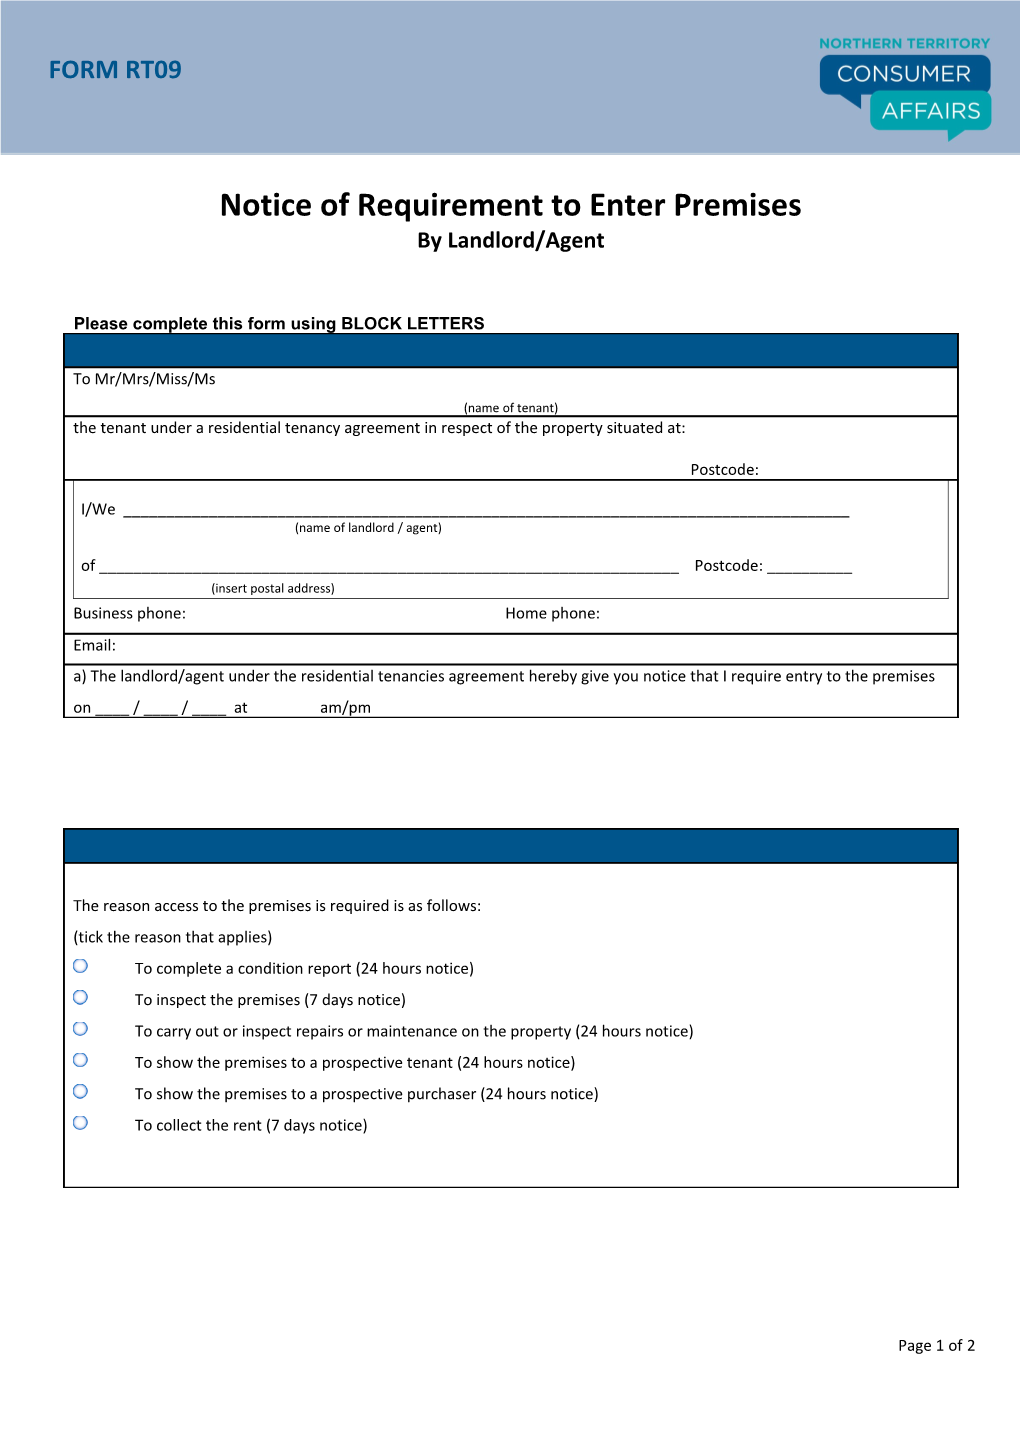 Form RT09 - Notice of Entry by Landlord